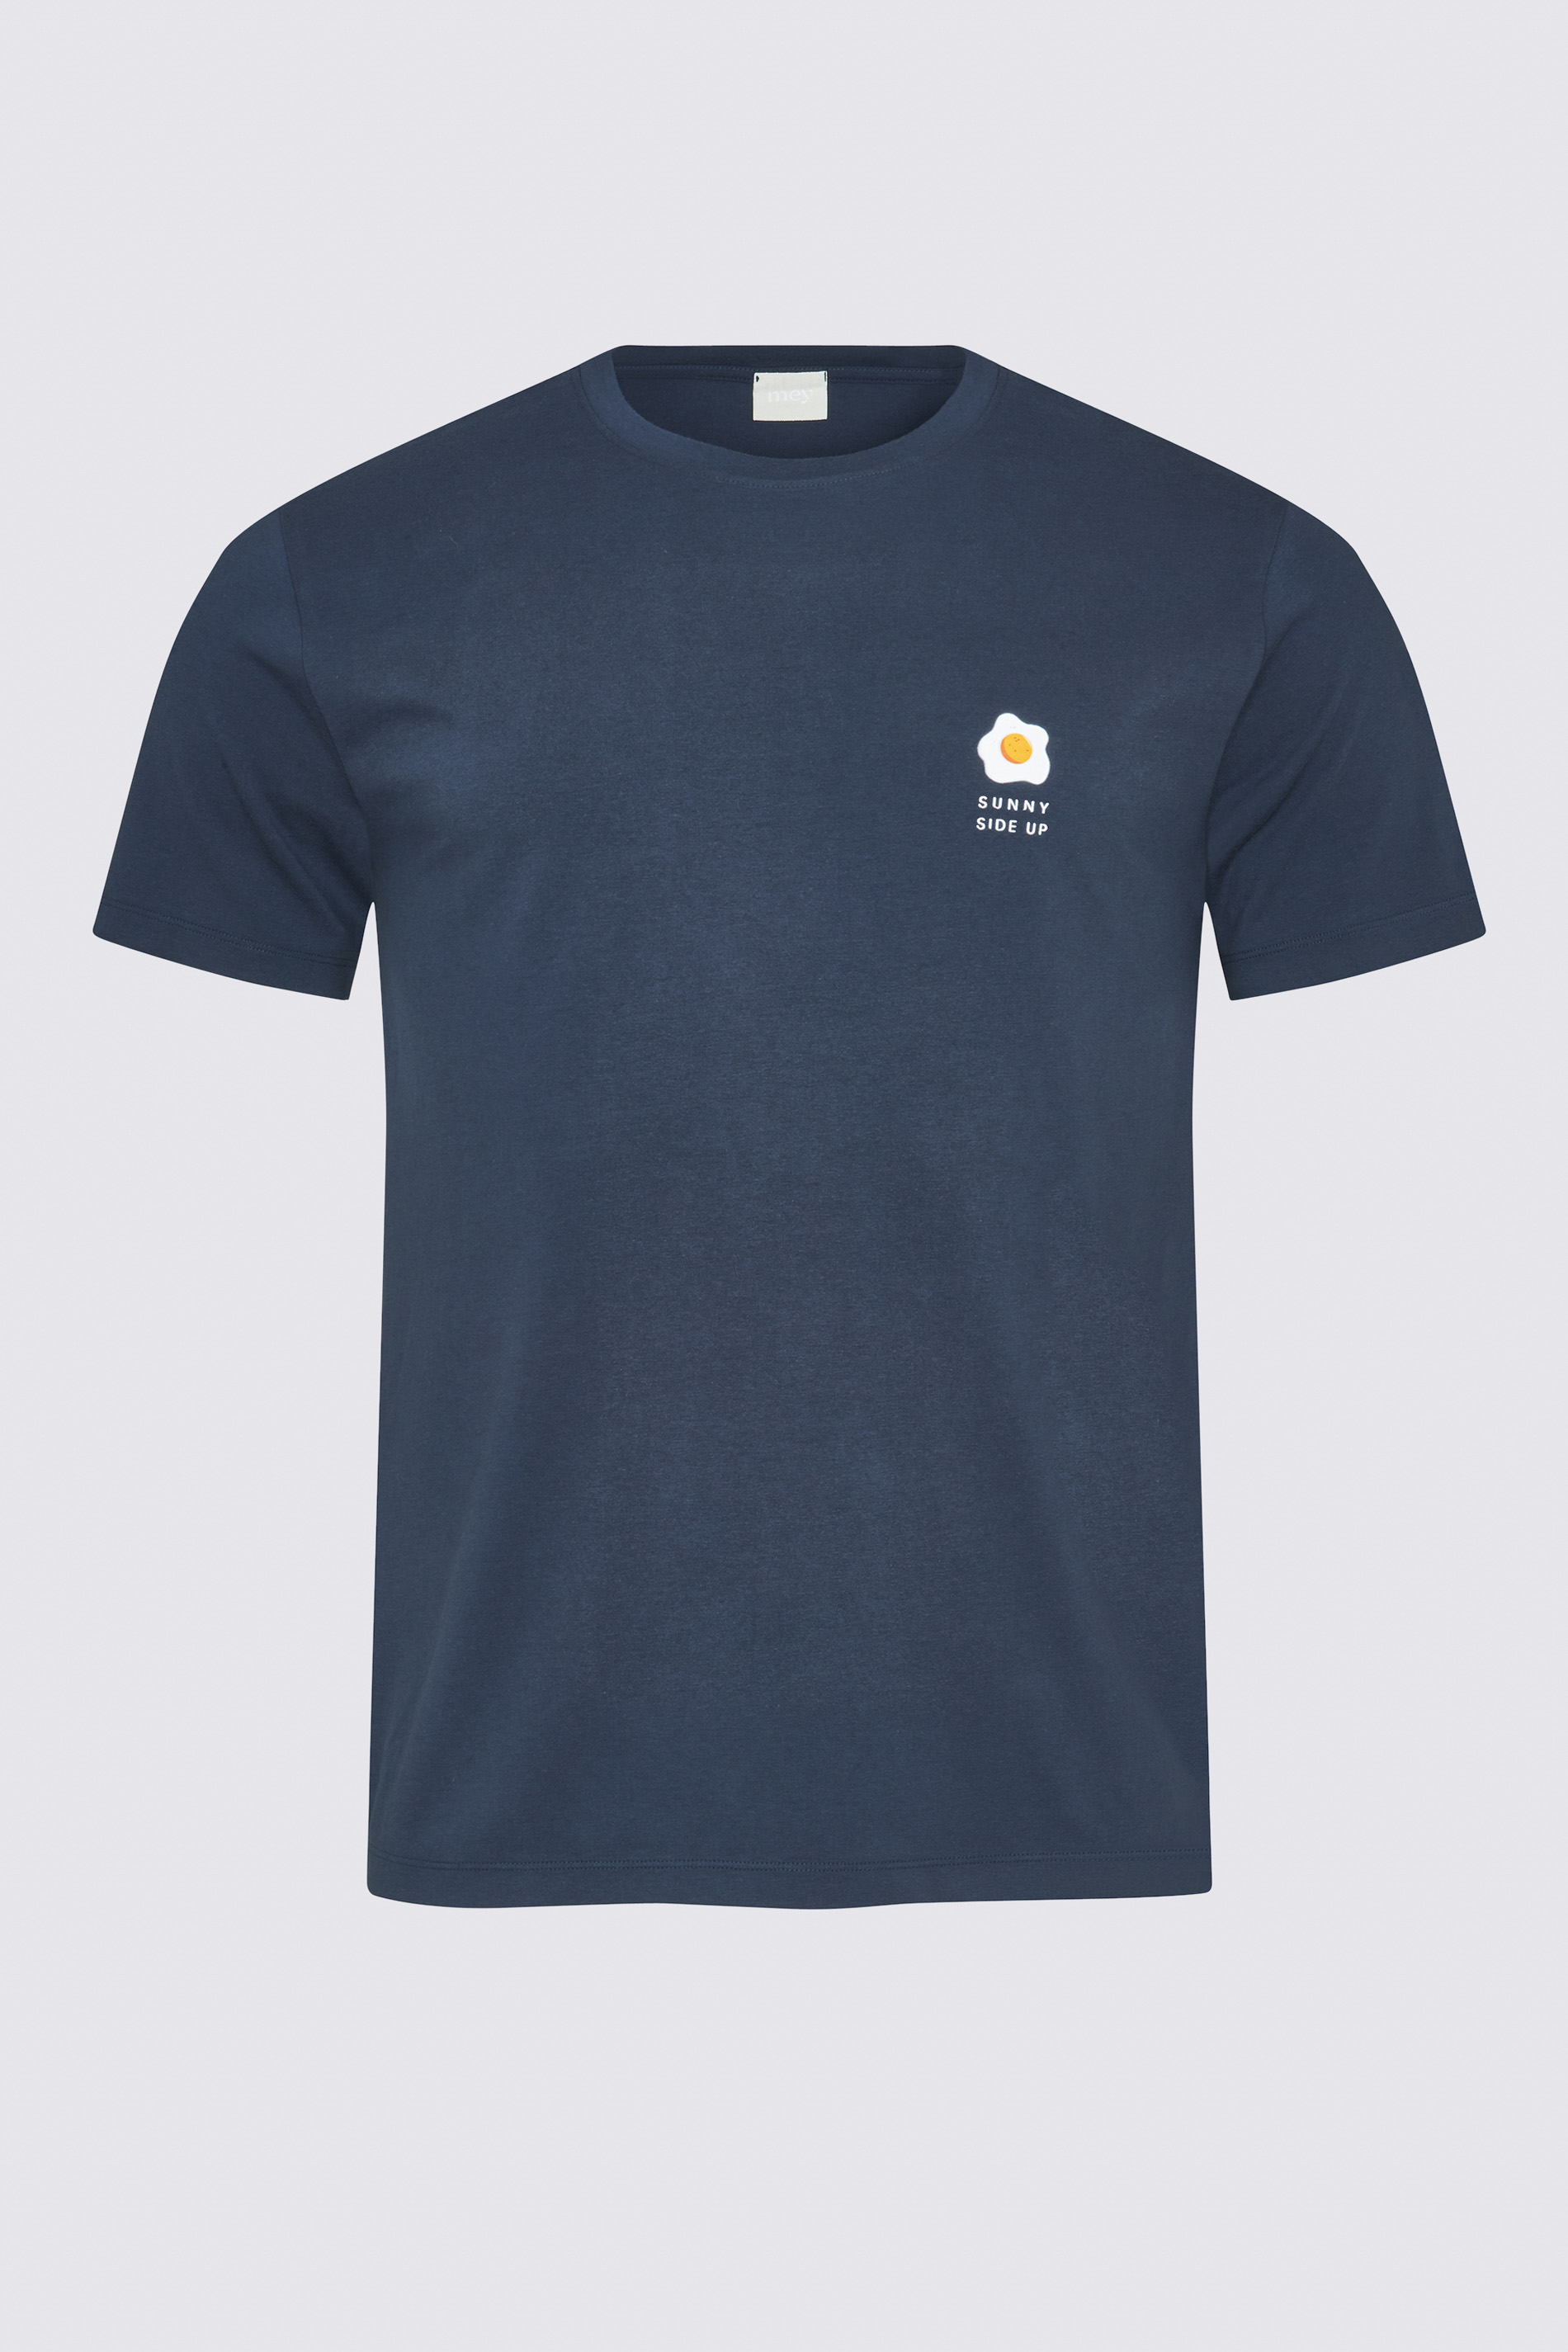 T-shirt Yacht Blue Serie RE:THINK COLOUR Uitknippen | mey®